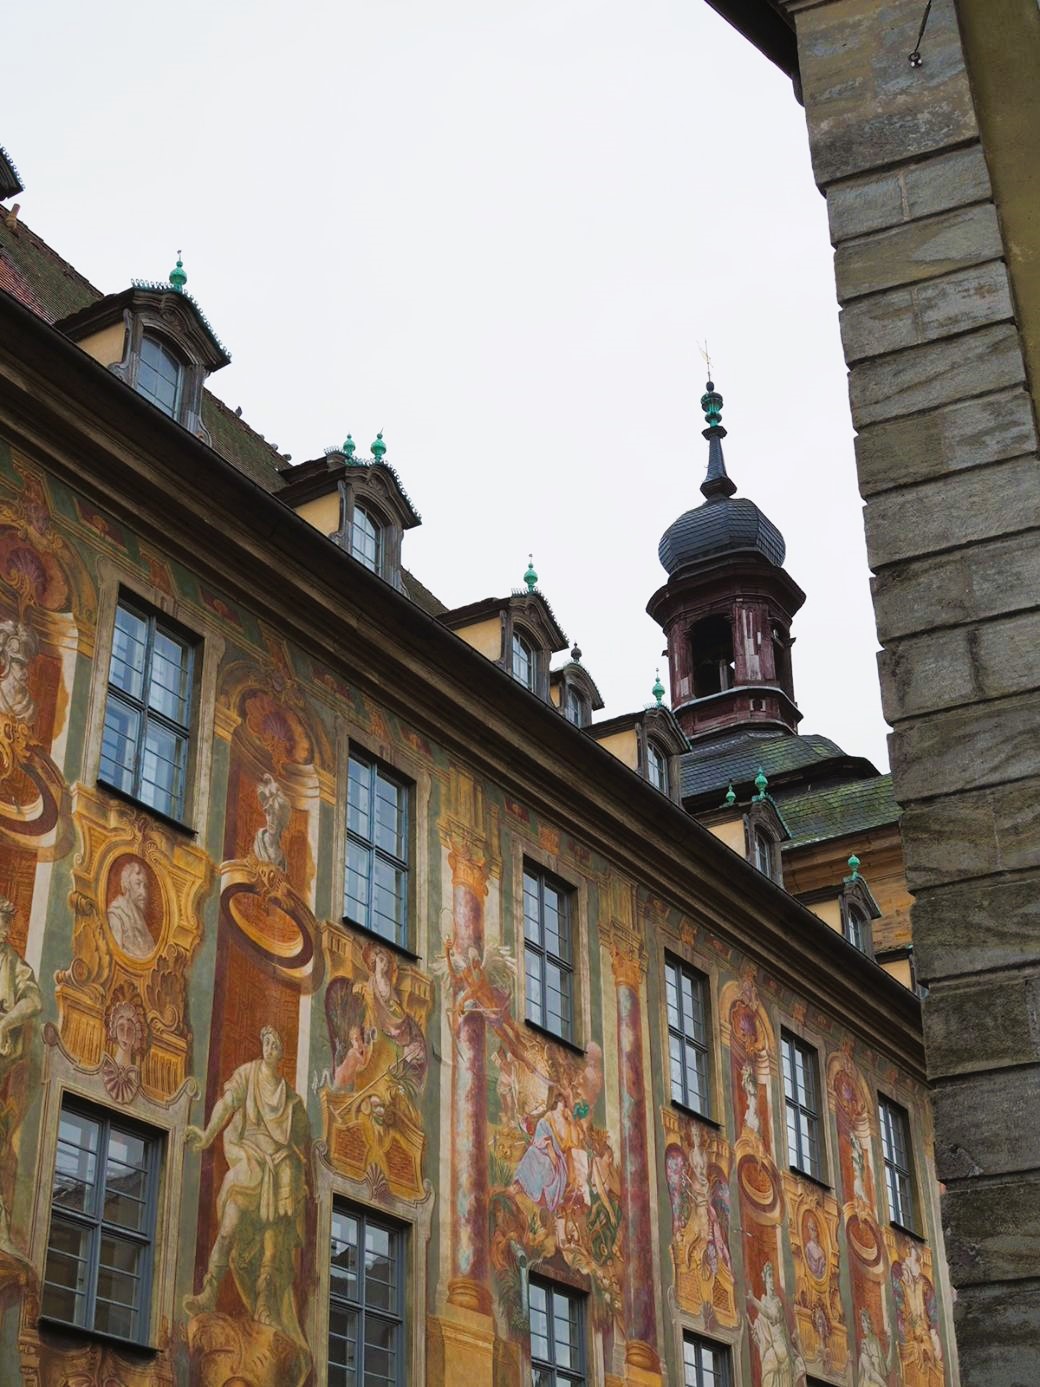 Many multi-coloured murals featuring robed figures and angels are painted onto the walls of the Rathaus in Bamberg, the iron-tipped tower looms over them.